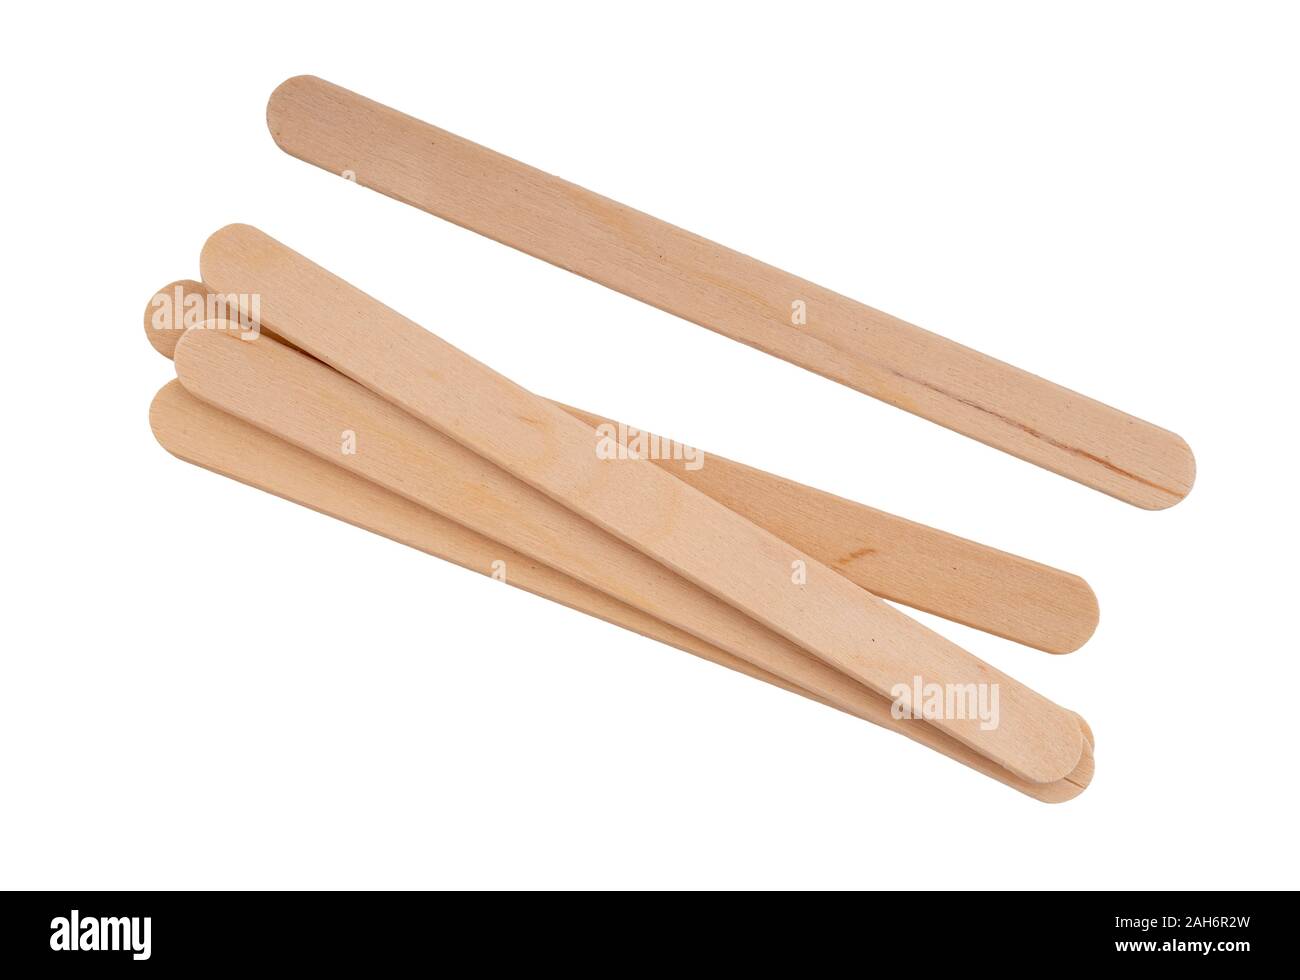 Wooden lollipop, popsicle or craft sticks, isolated on white background. Stock Photo